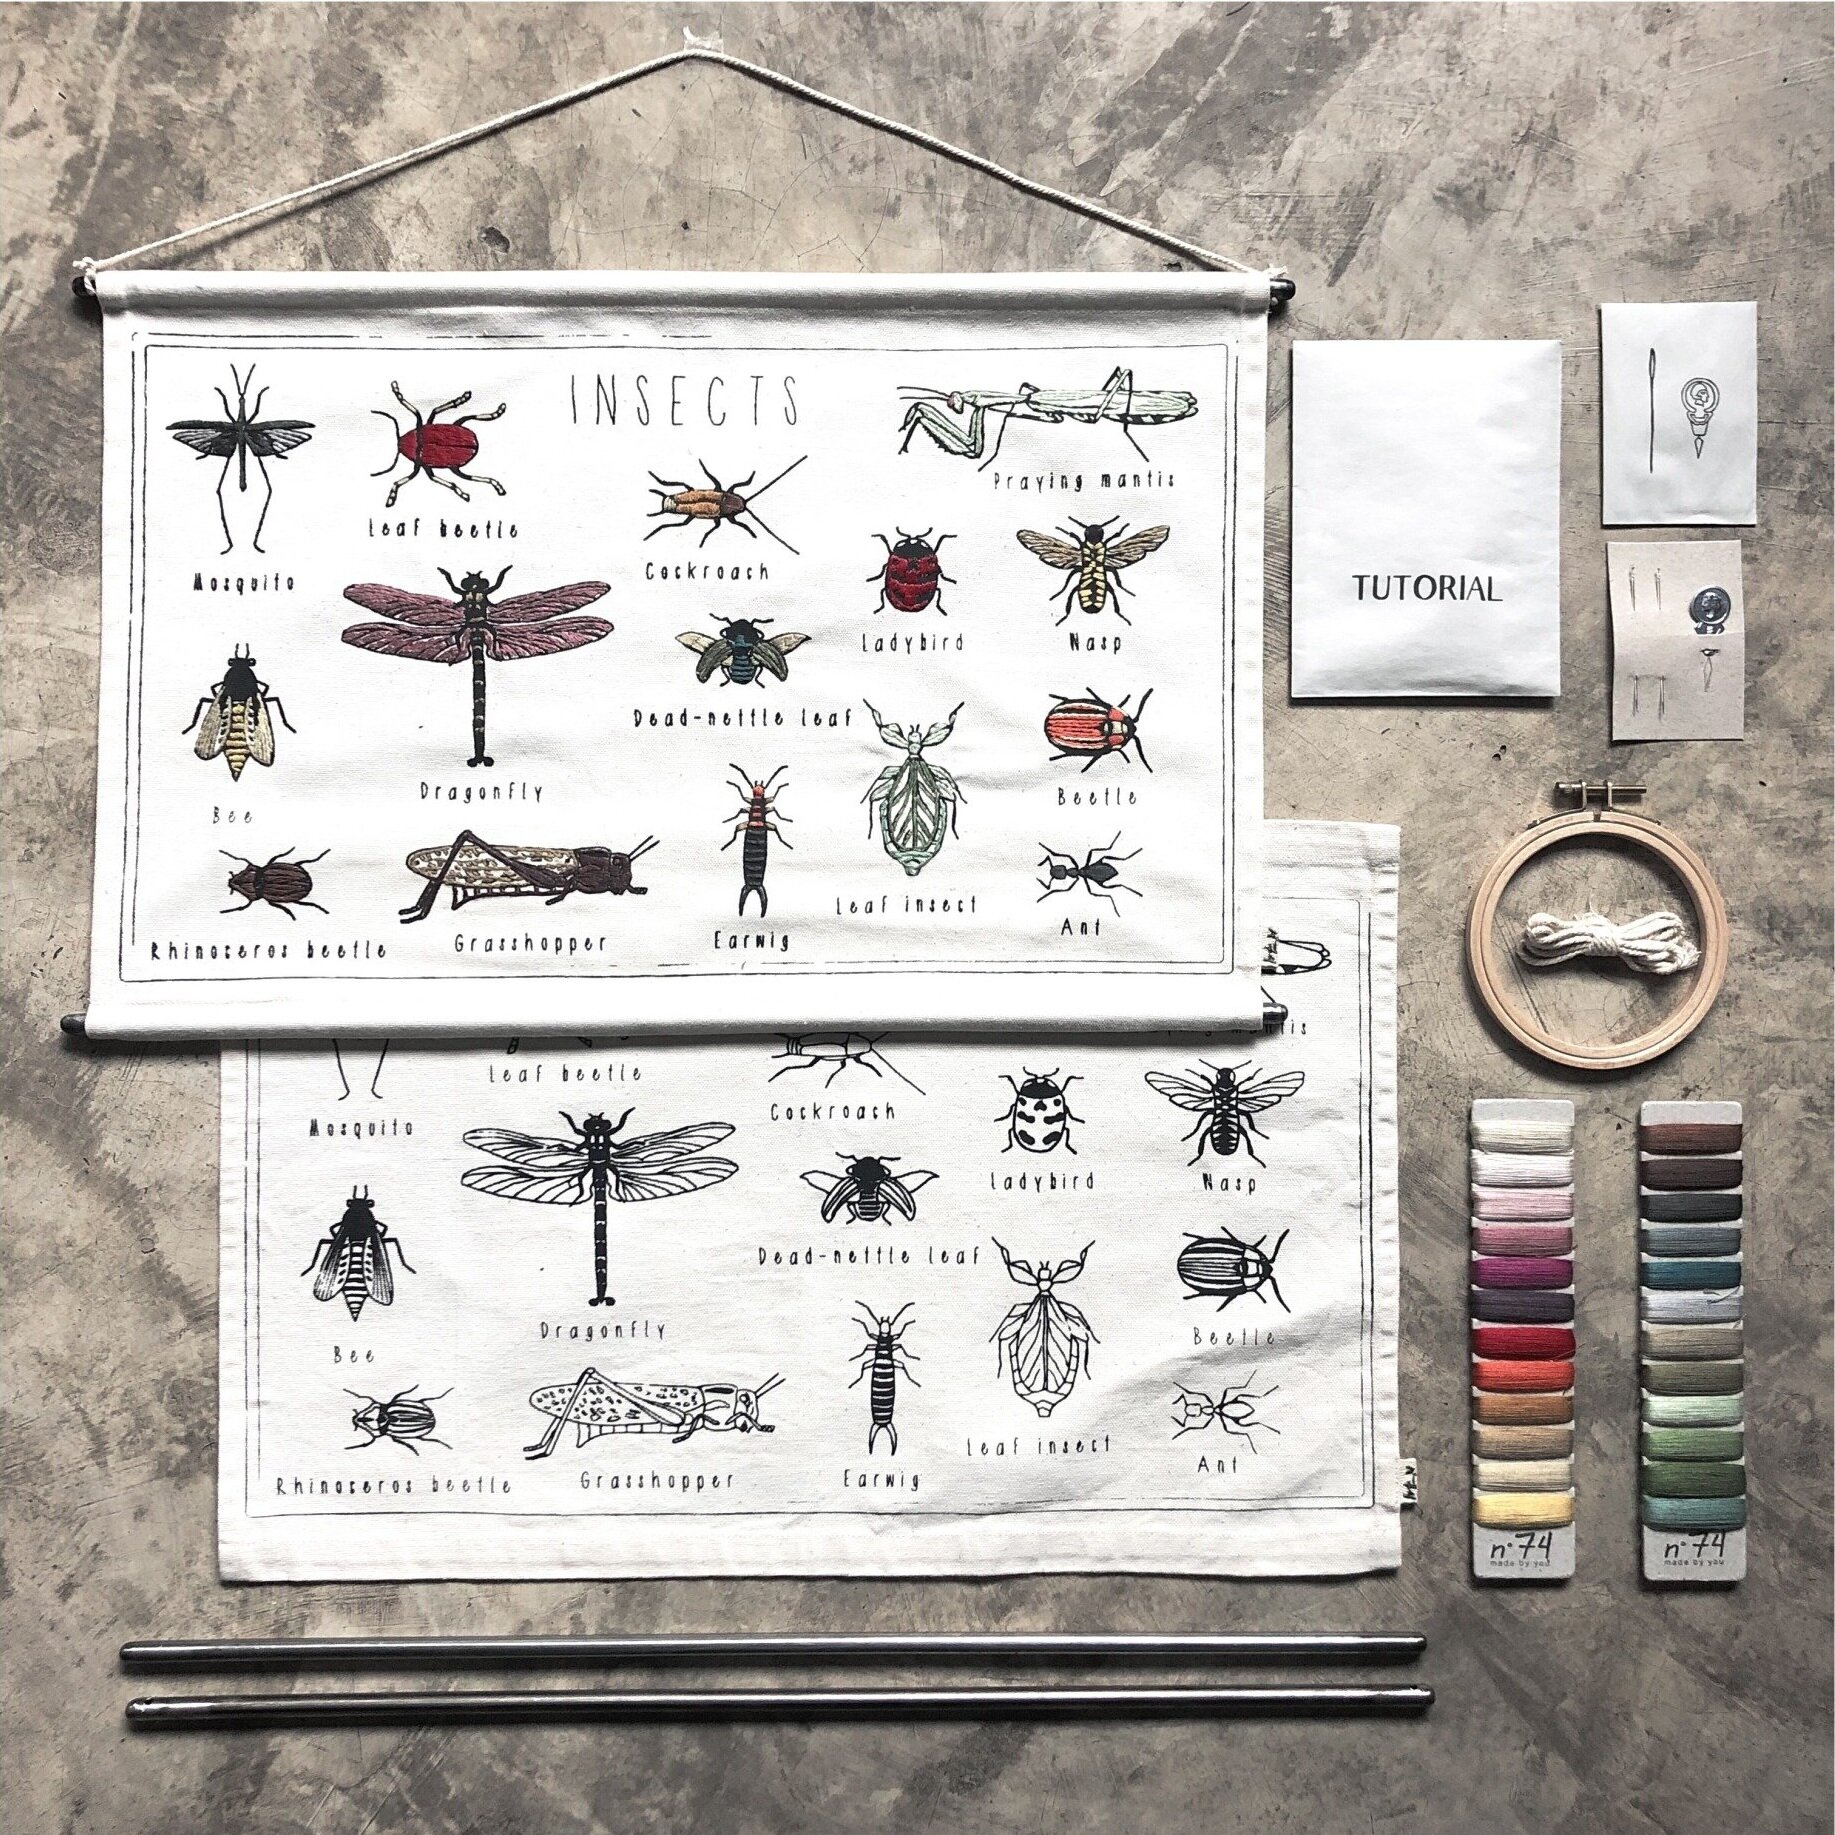  DIY embroidery kit -  Smallable  